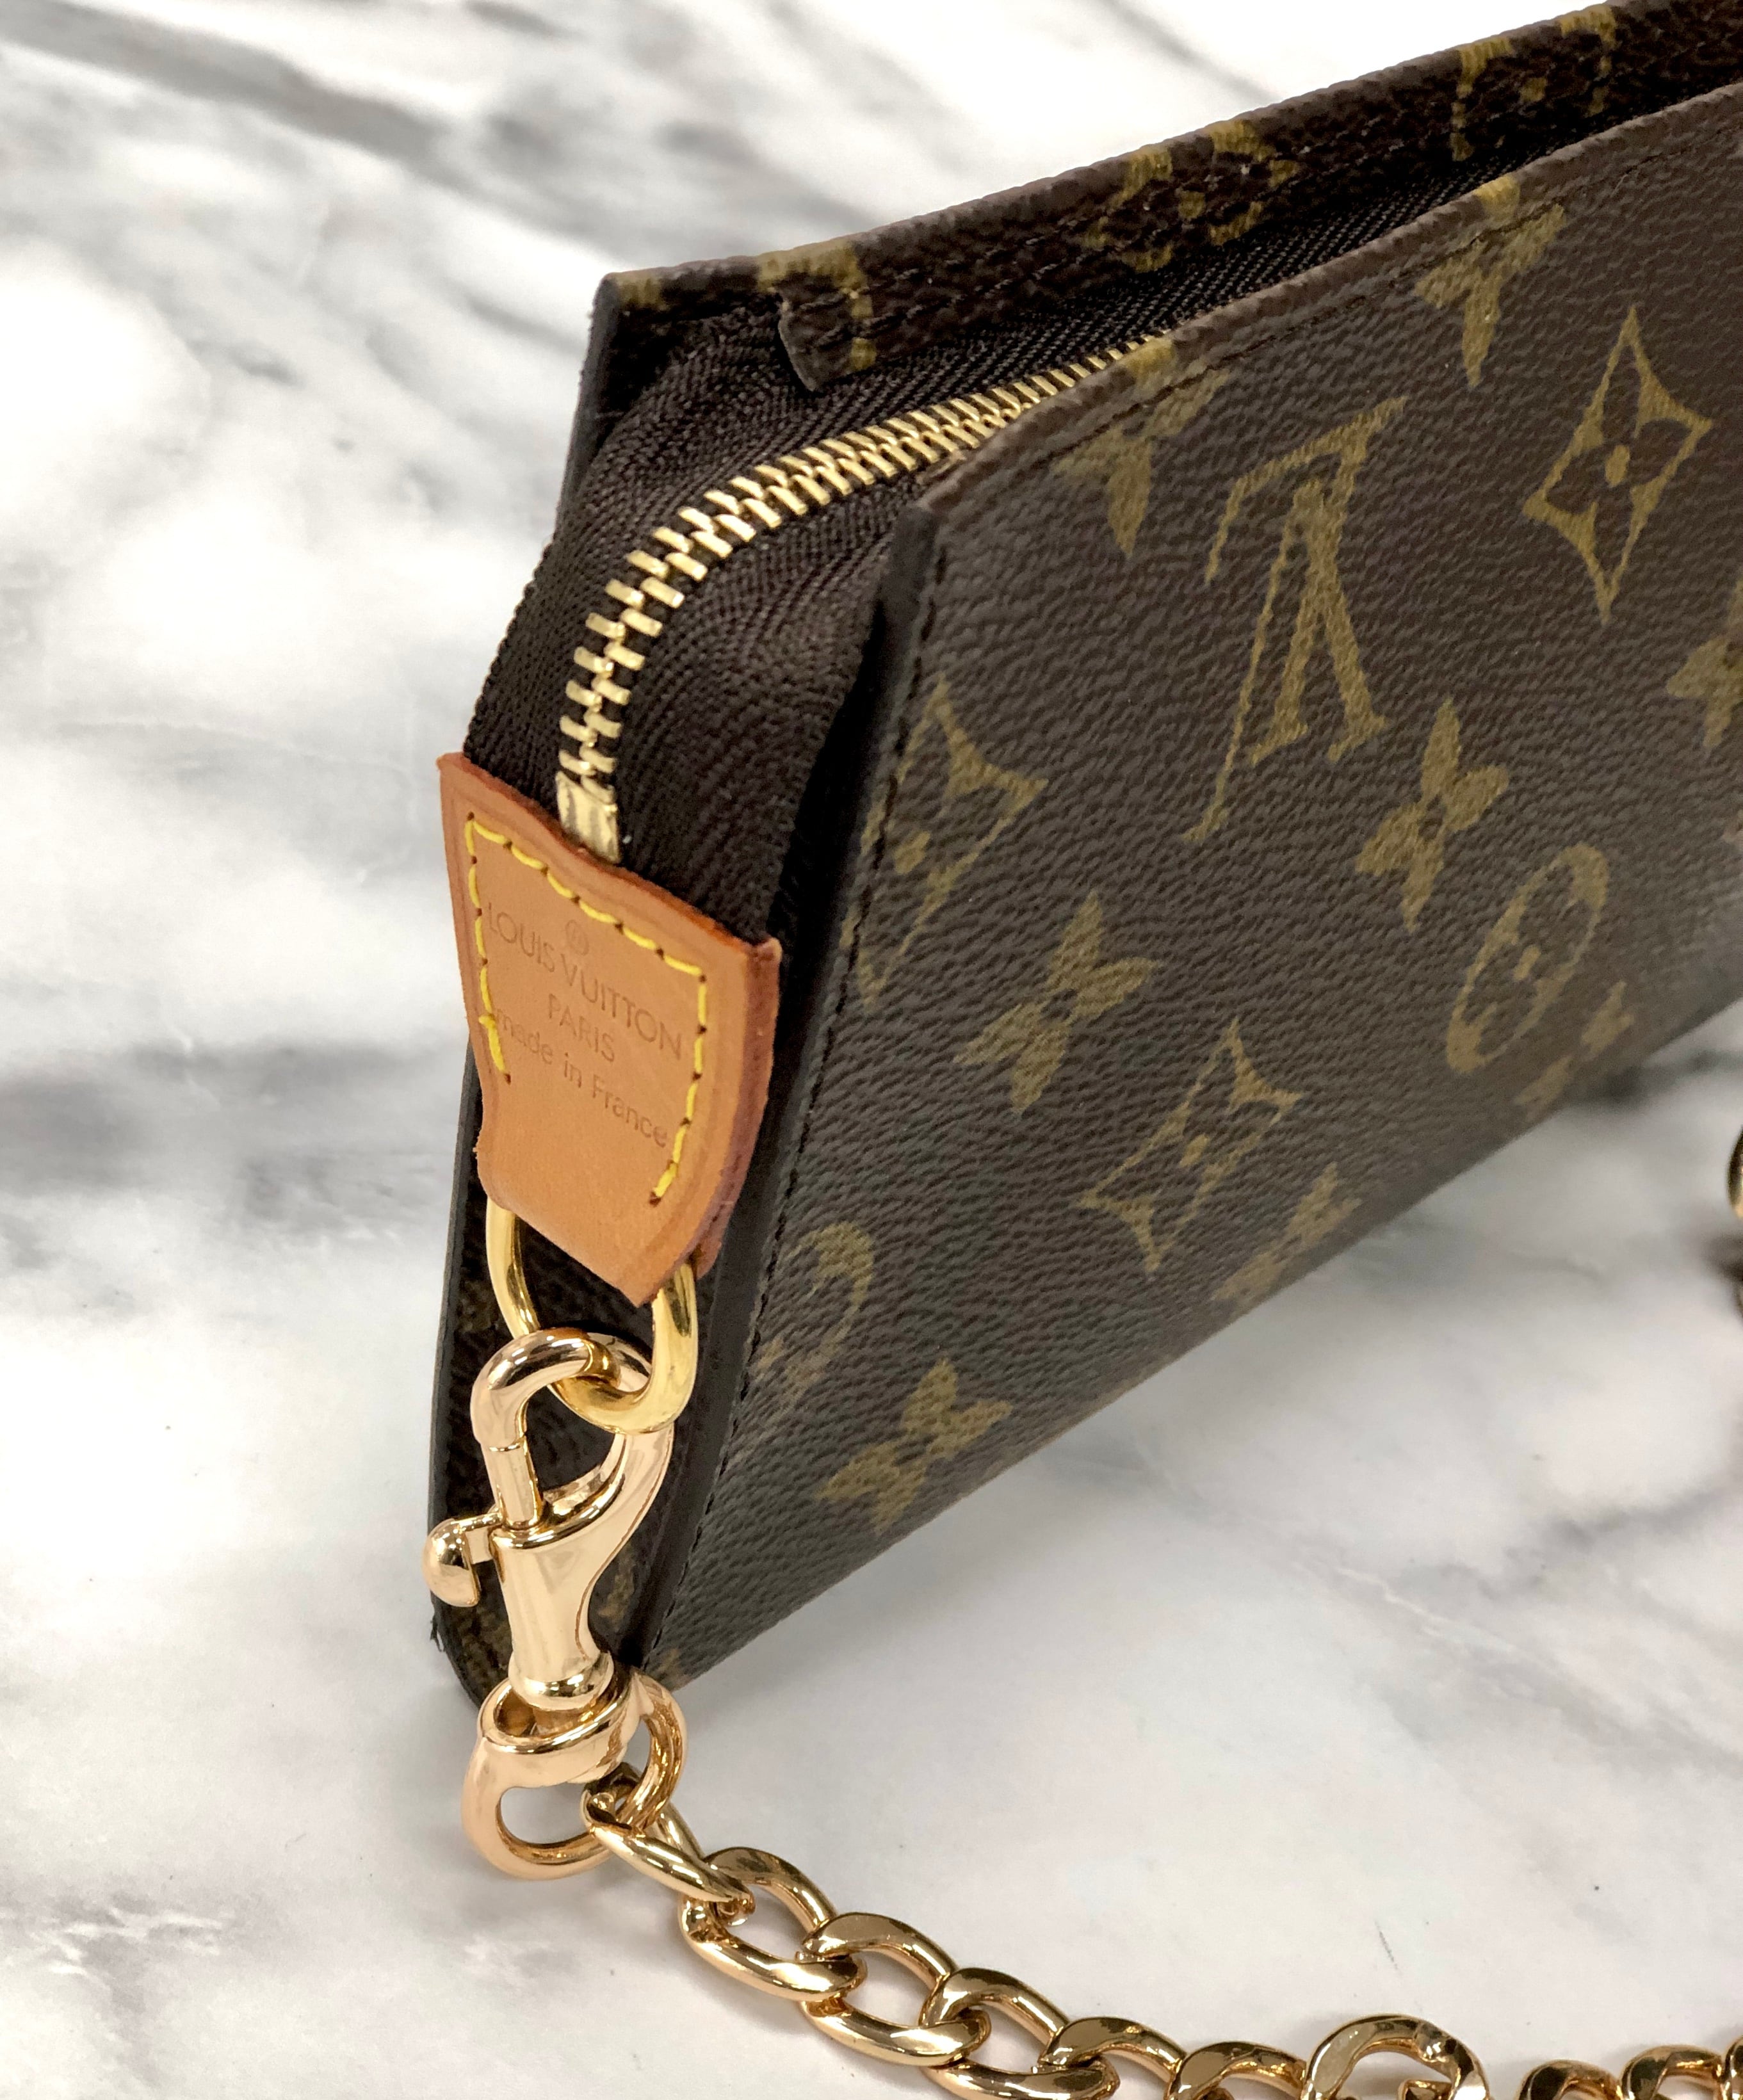 LOUIS VUITTON　ルイ ヴィトン　モノグラム　チェーン　アクセサリーポーチ　ミニバッグ　ブラウン　vintage　ヴィンテージ　オールド　 x3u8p6 | VintageShop solo powered by BASE